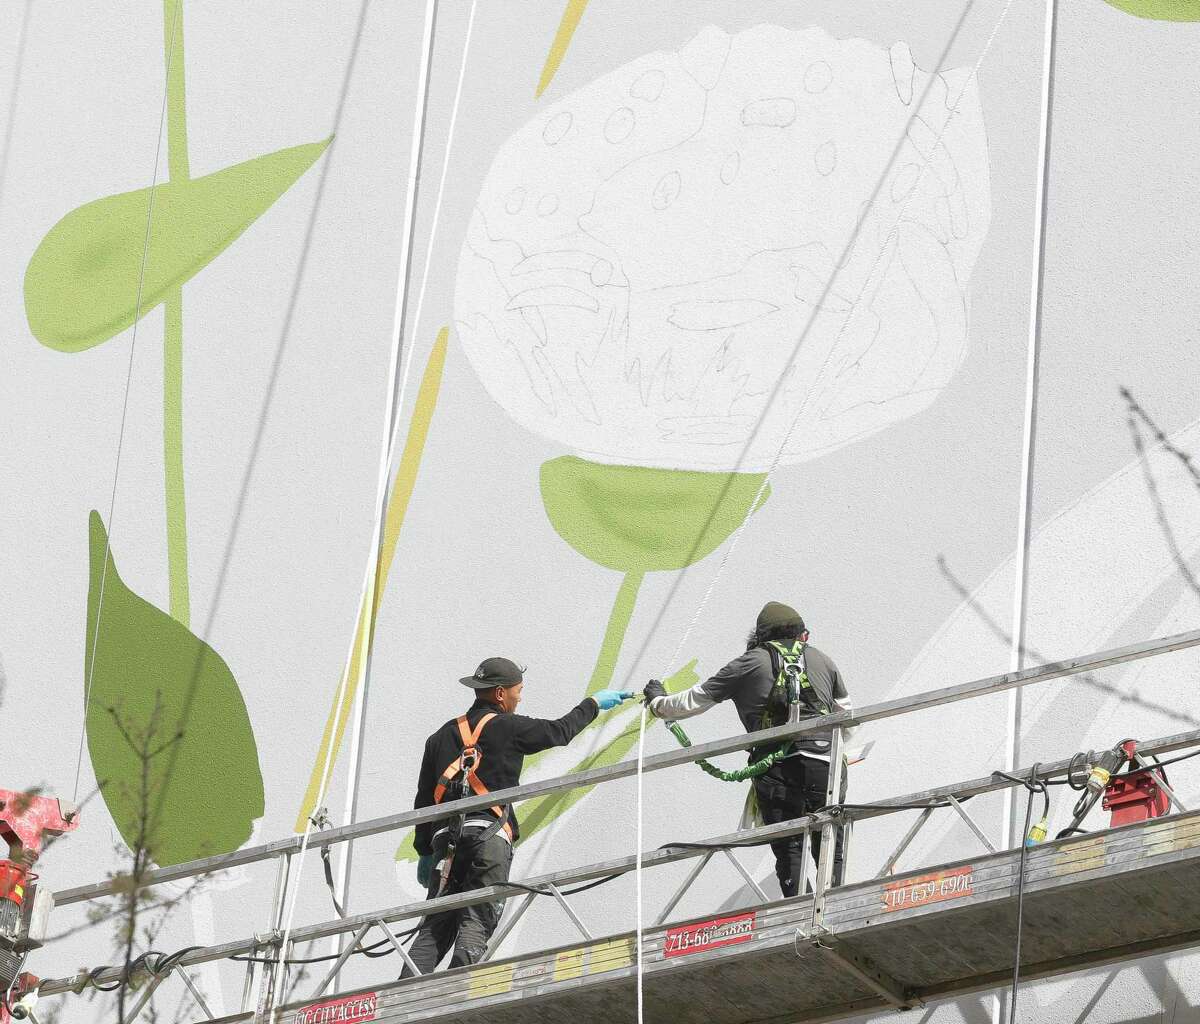 Workers paint flowers using several lifts along a 35,000-square-foot mural at The Woodlands Waterway, Tuesday, March 29, 2022, in The Woodlands. Since late last week, a fourteen-person crew has worked to transform the south wall of the Waterway Square garage into the art piece reaching 105 feet all and 358 feet wide, which will anchor the new 2.3-acre outdoor community gathering space. The mural will be unveiled during The Woodlands Waterway Arts Festival, which begins April 9.